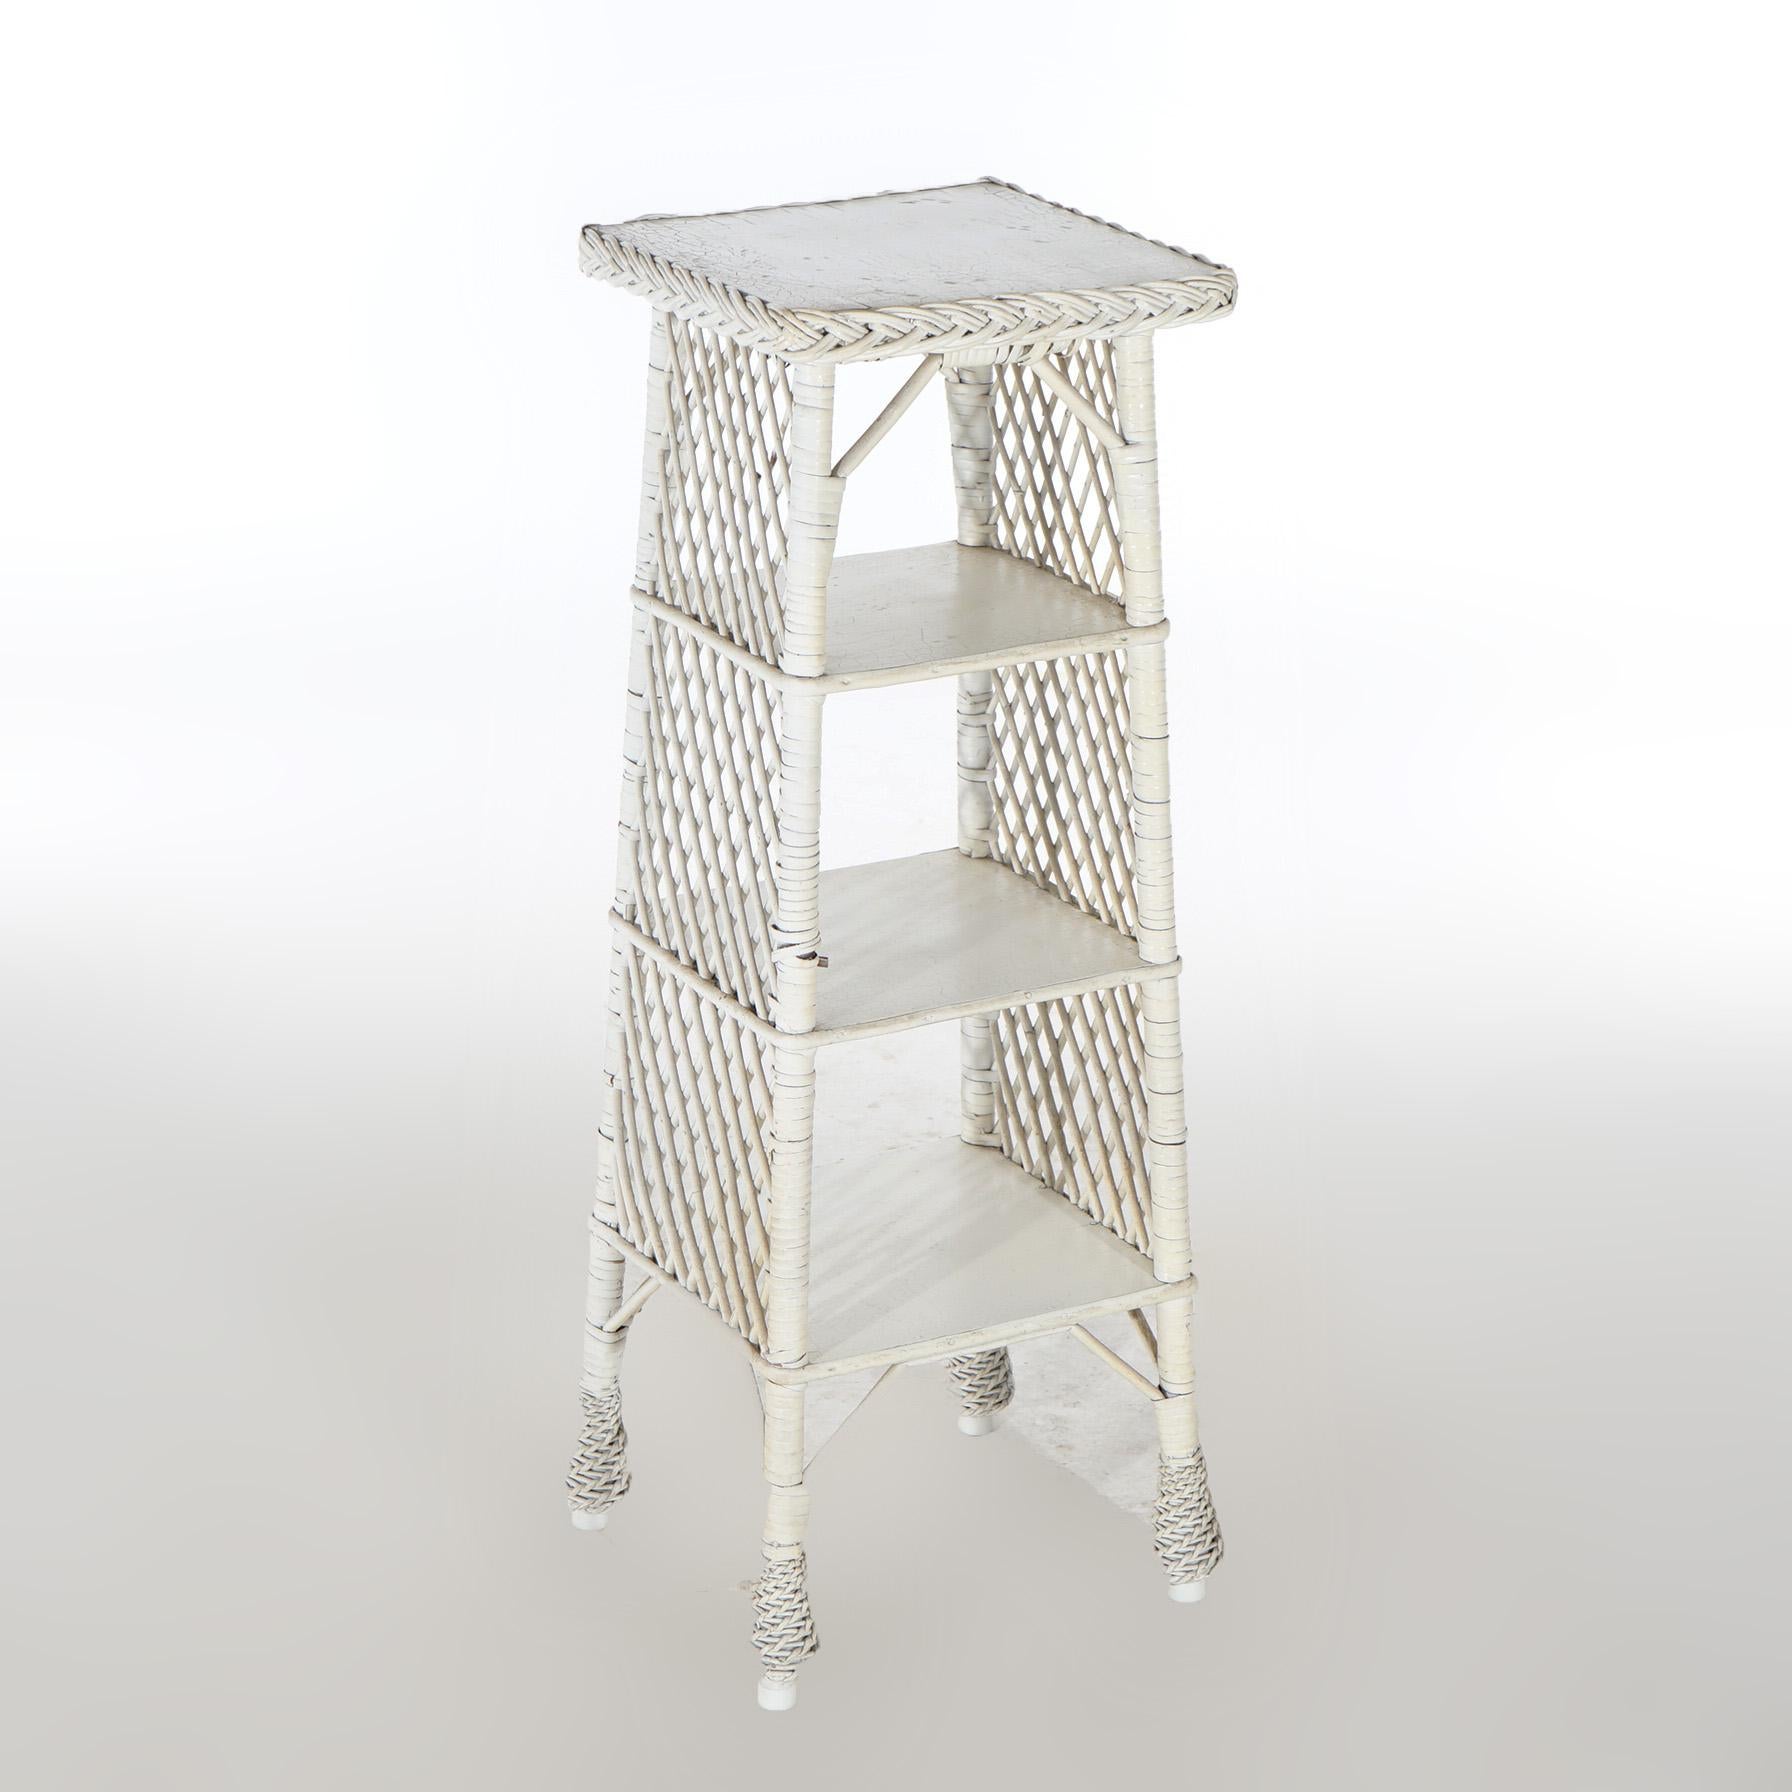 An Arts and Crafts Heywood Wakefield Bar Harbor White Painted Wicker Magazine Stand Circa 1915

Measures- 41.25''H x 15.25''W x 15''D